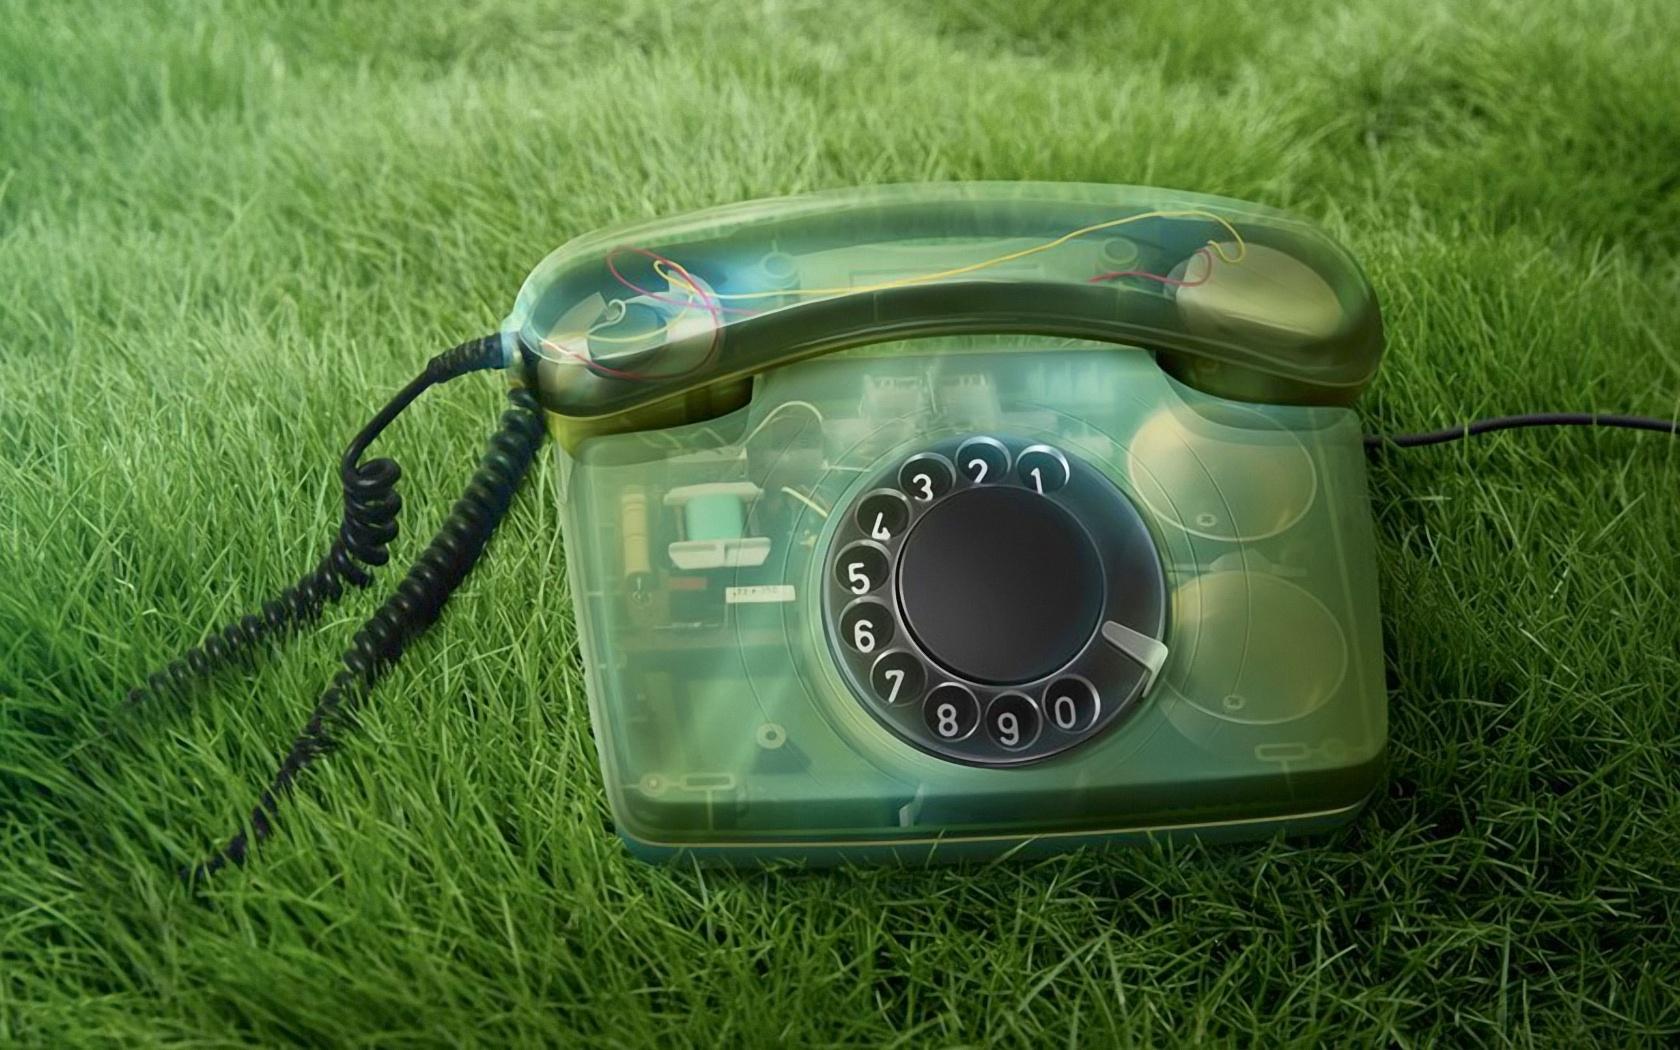 Phone ongrass, photo, download, wallpapers for desktop